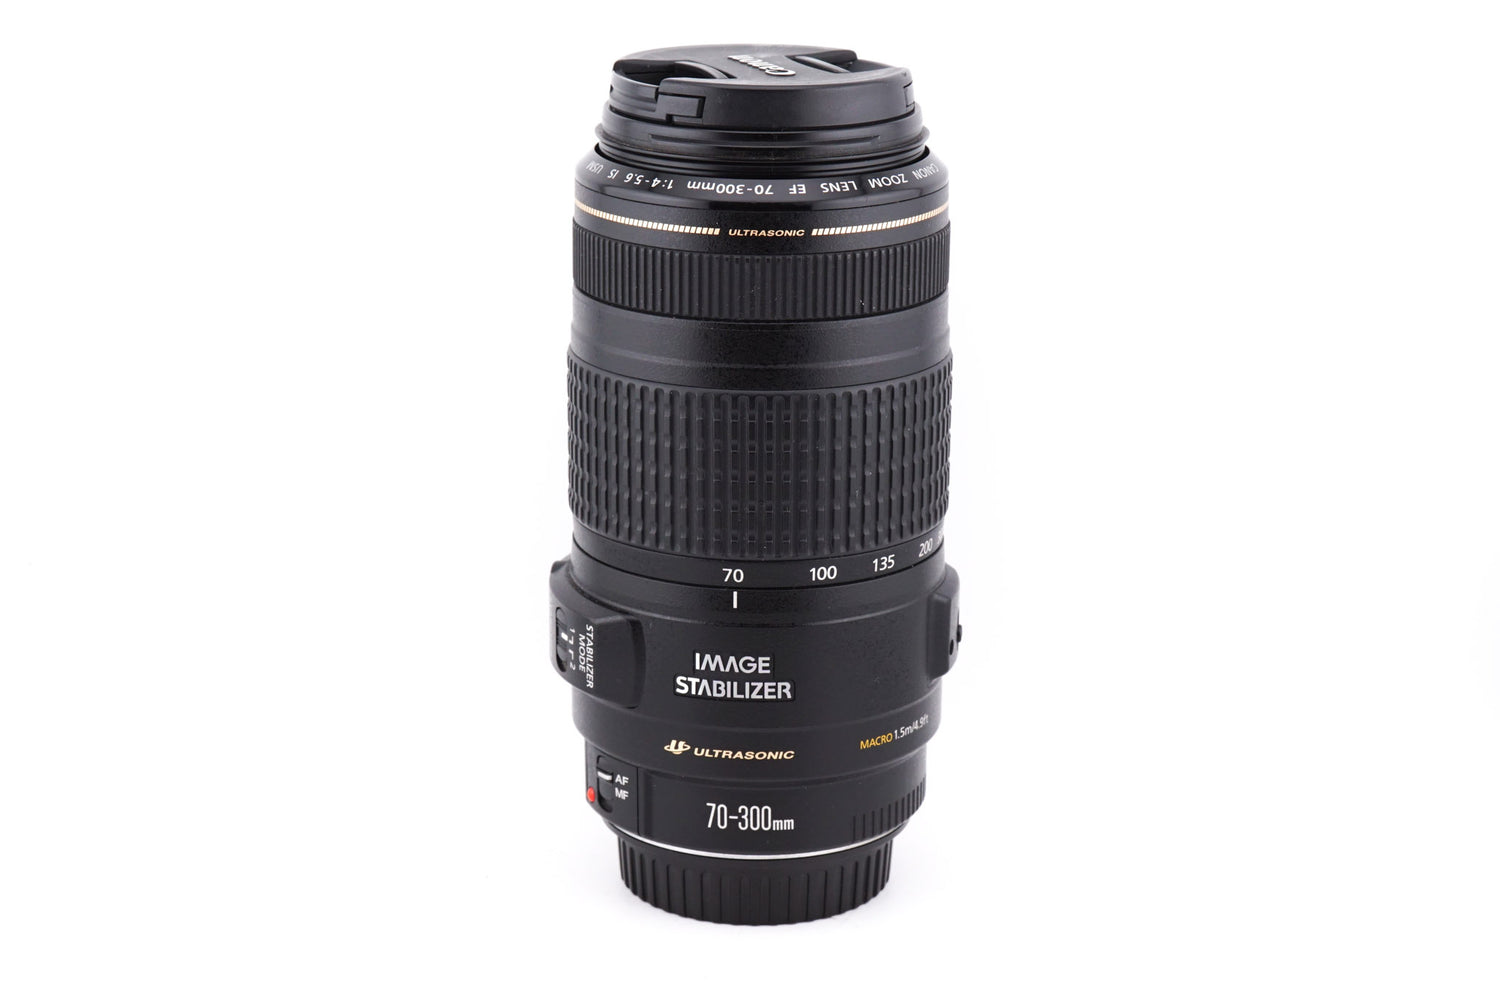 Canon 70-300mm f4-5.6 IS USM - Lens